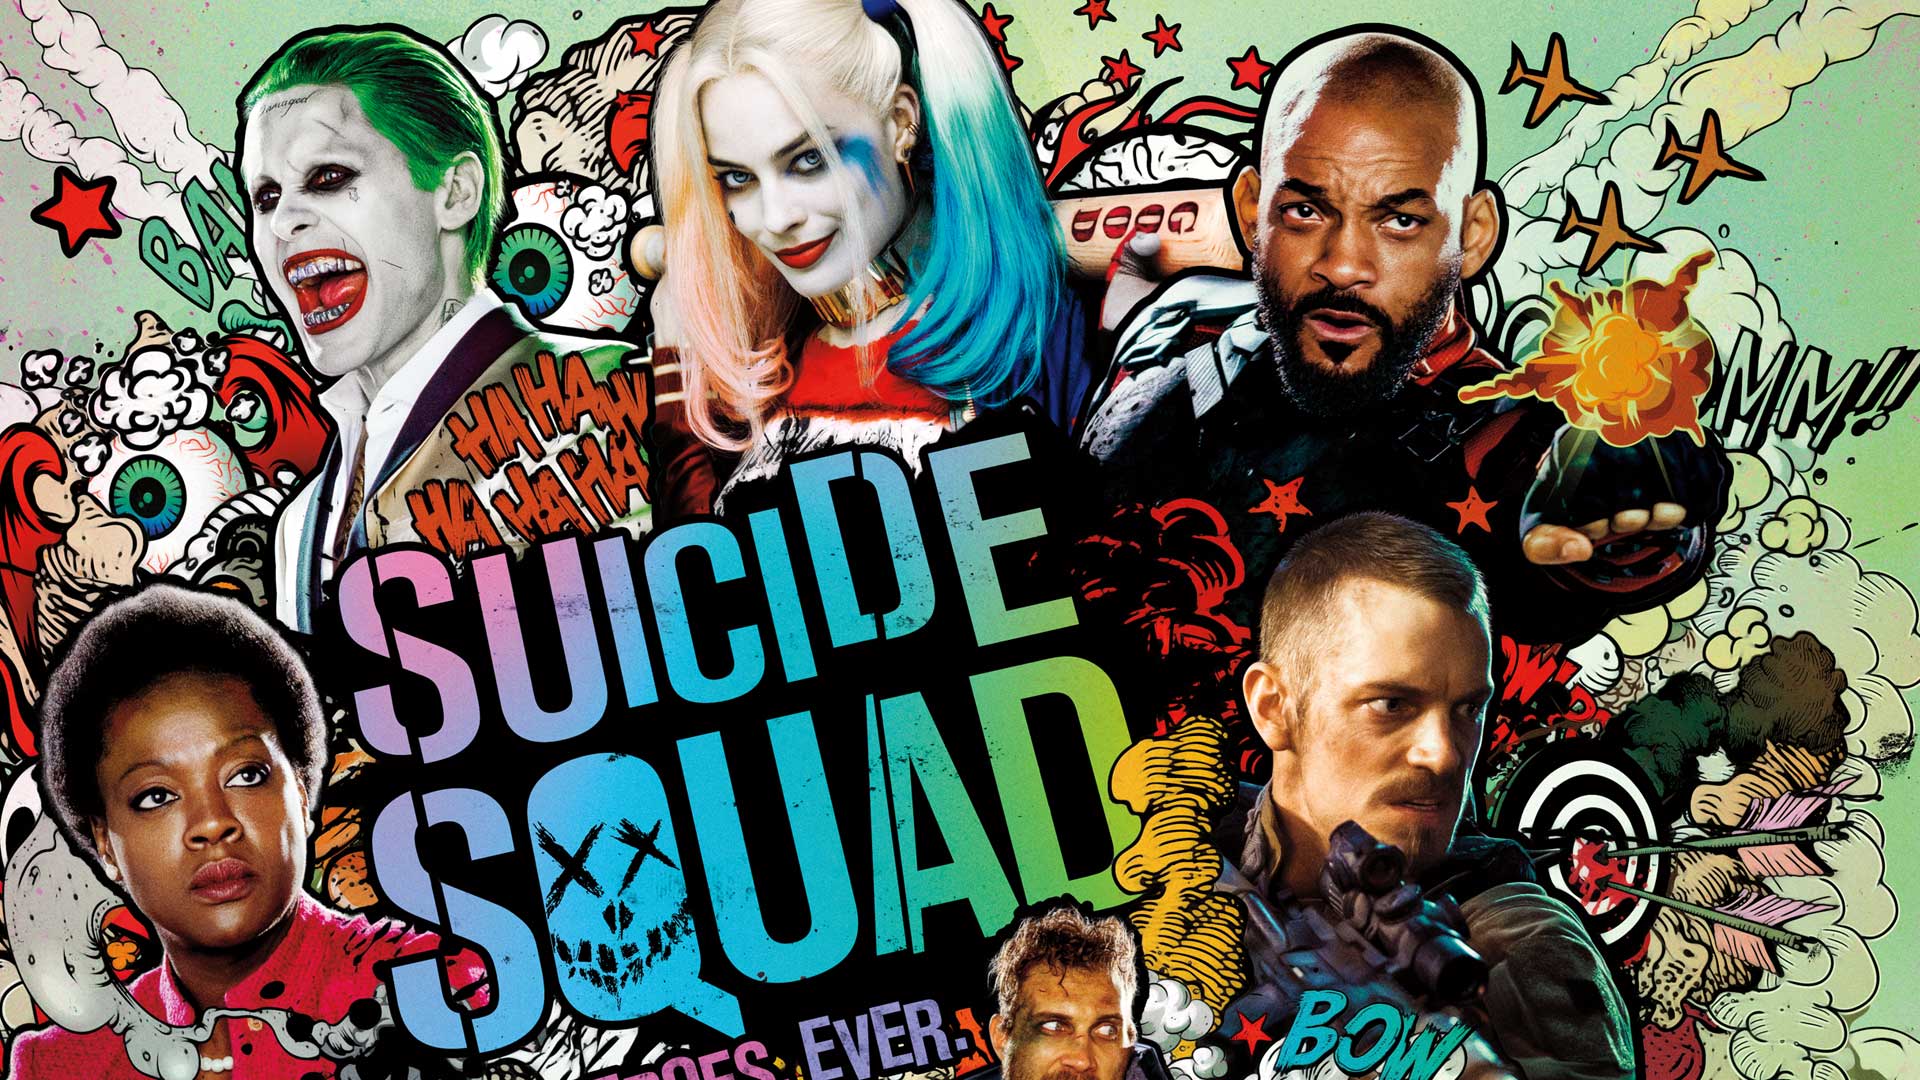 Casting Call For Dc Comic S The Suicide Squad 2 In Atlanta Auditions Free - casting call club suicide squad a dc roblox series